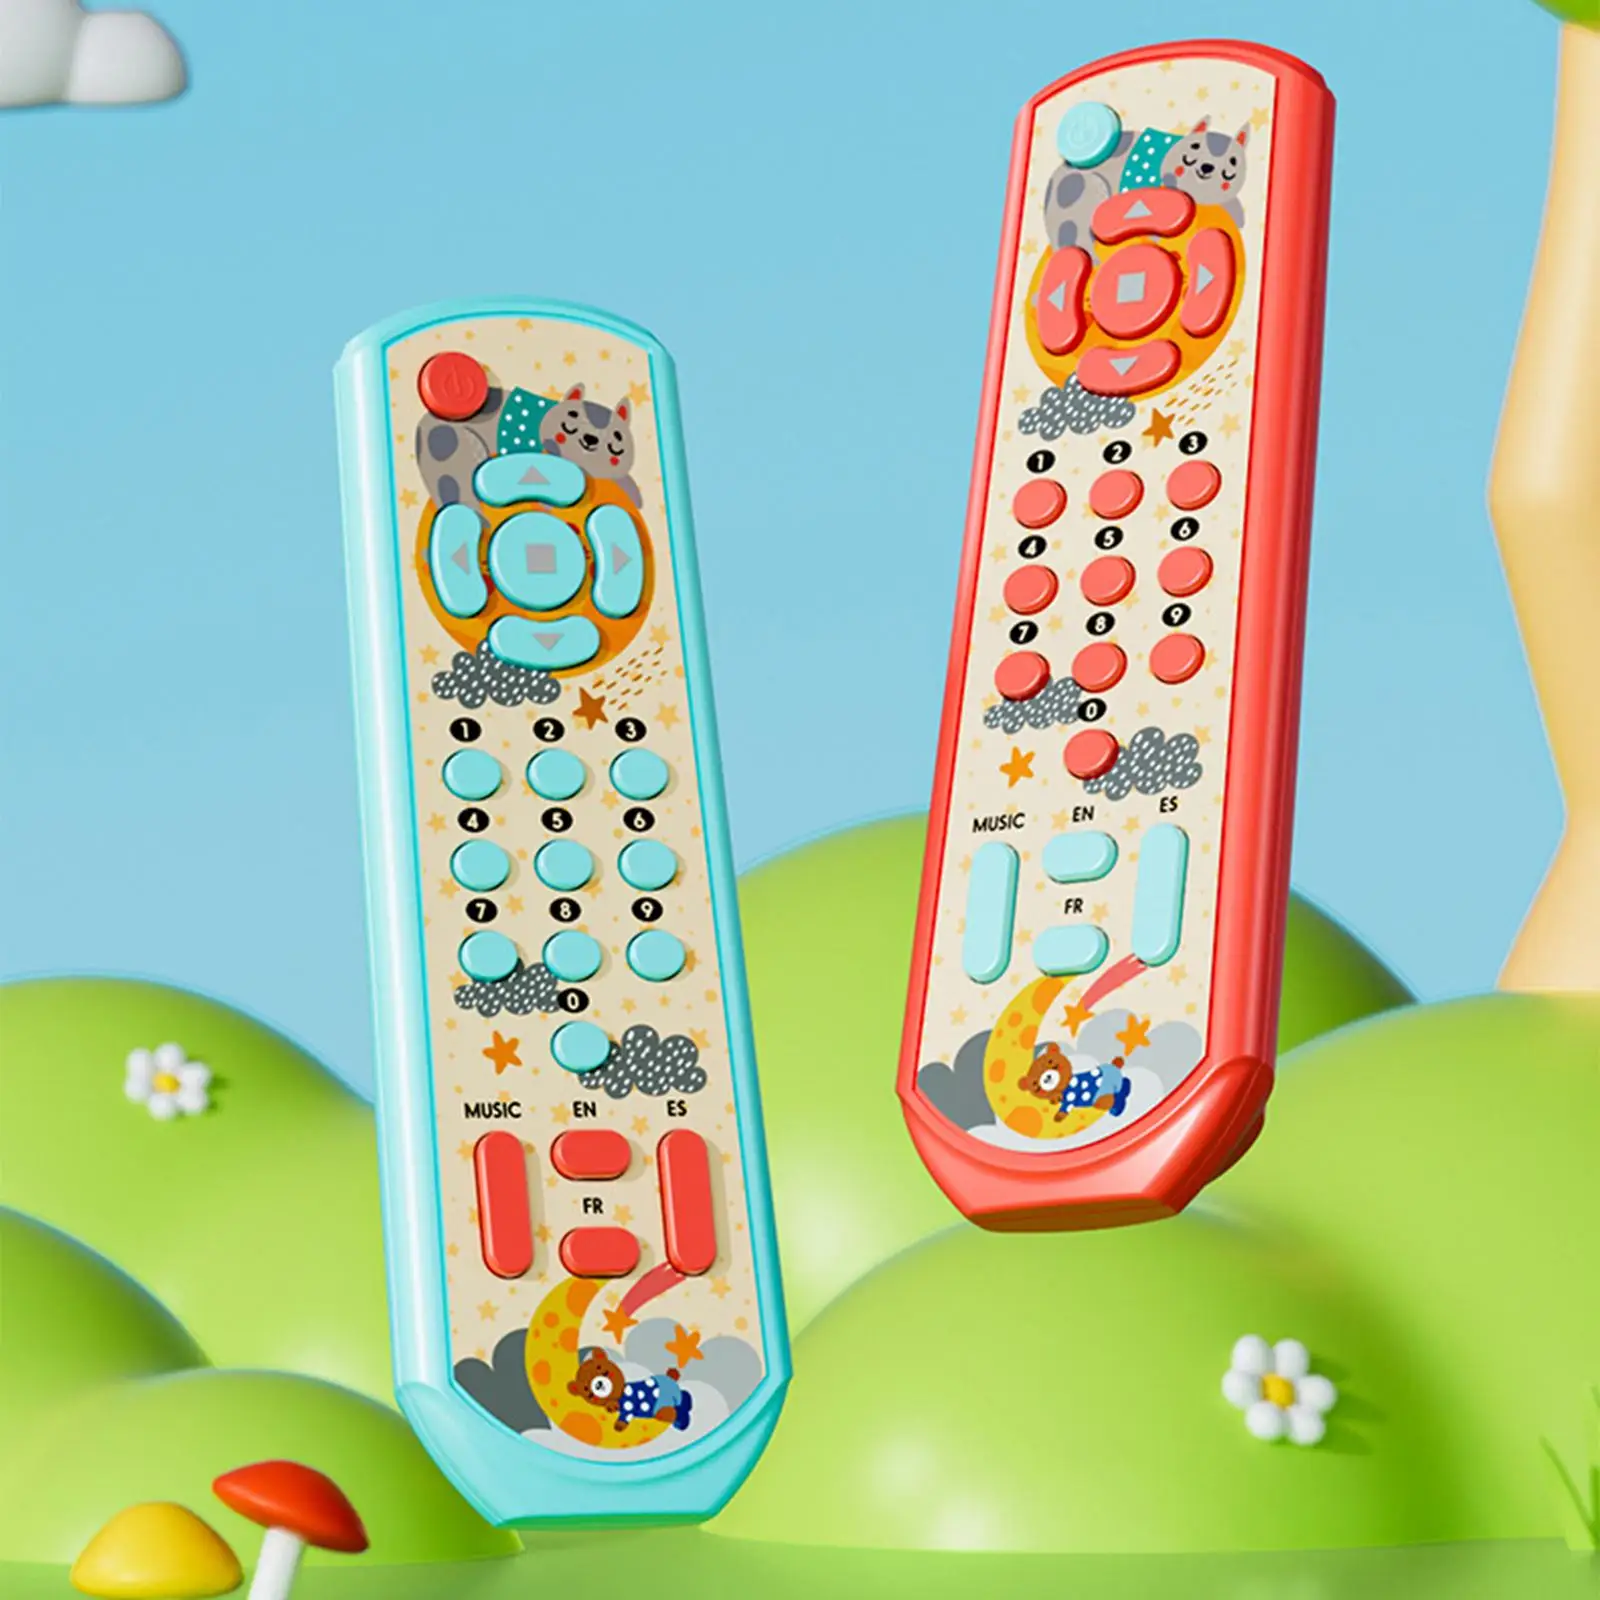 TV Remote Control Toy Early Educational Toys for Kids Toddler Birthday Gifts